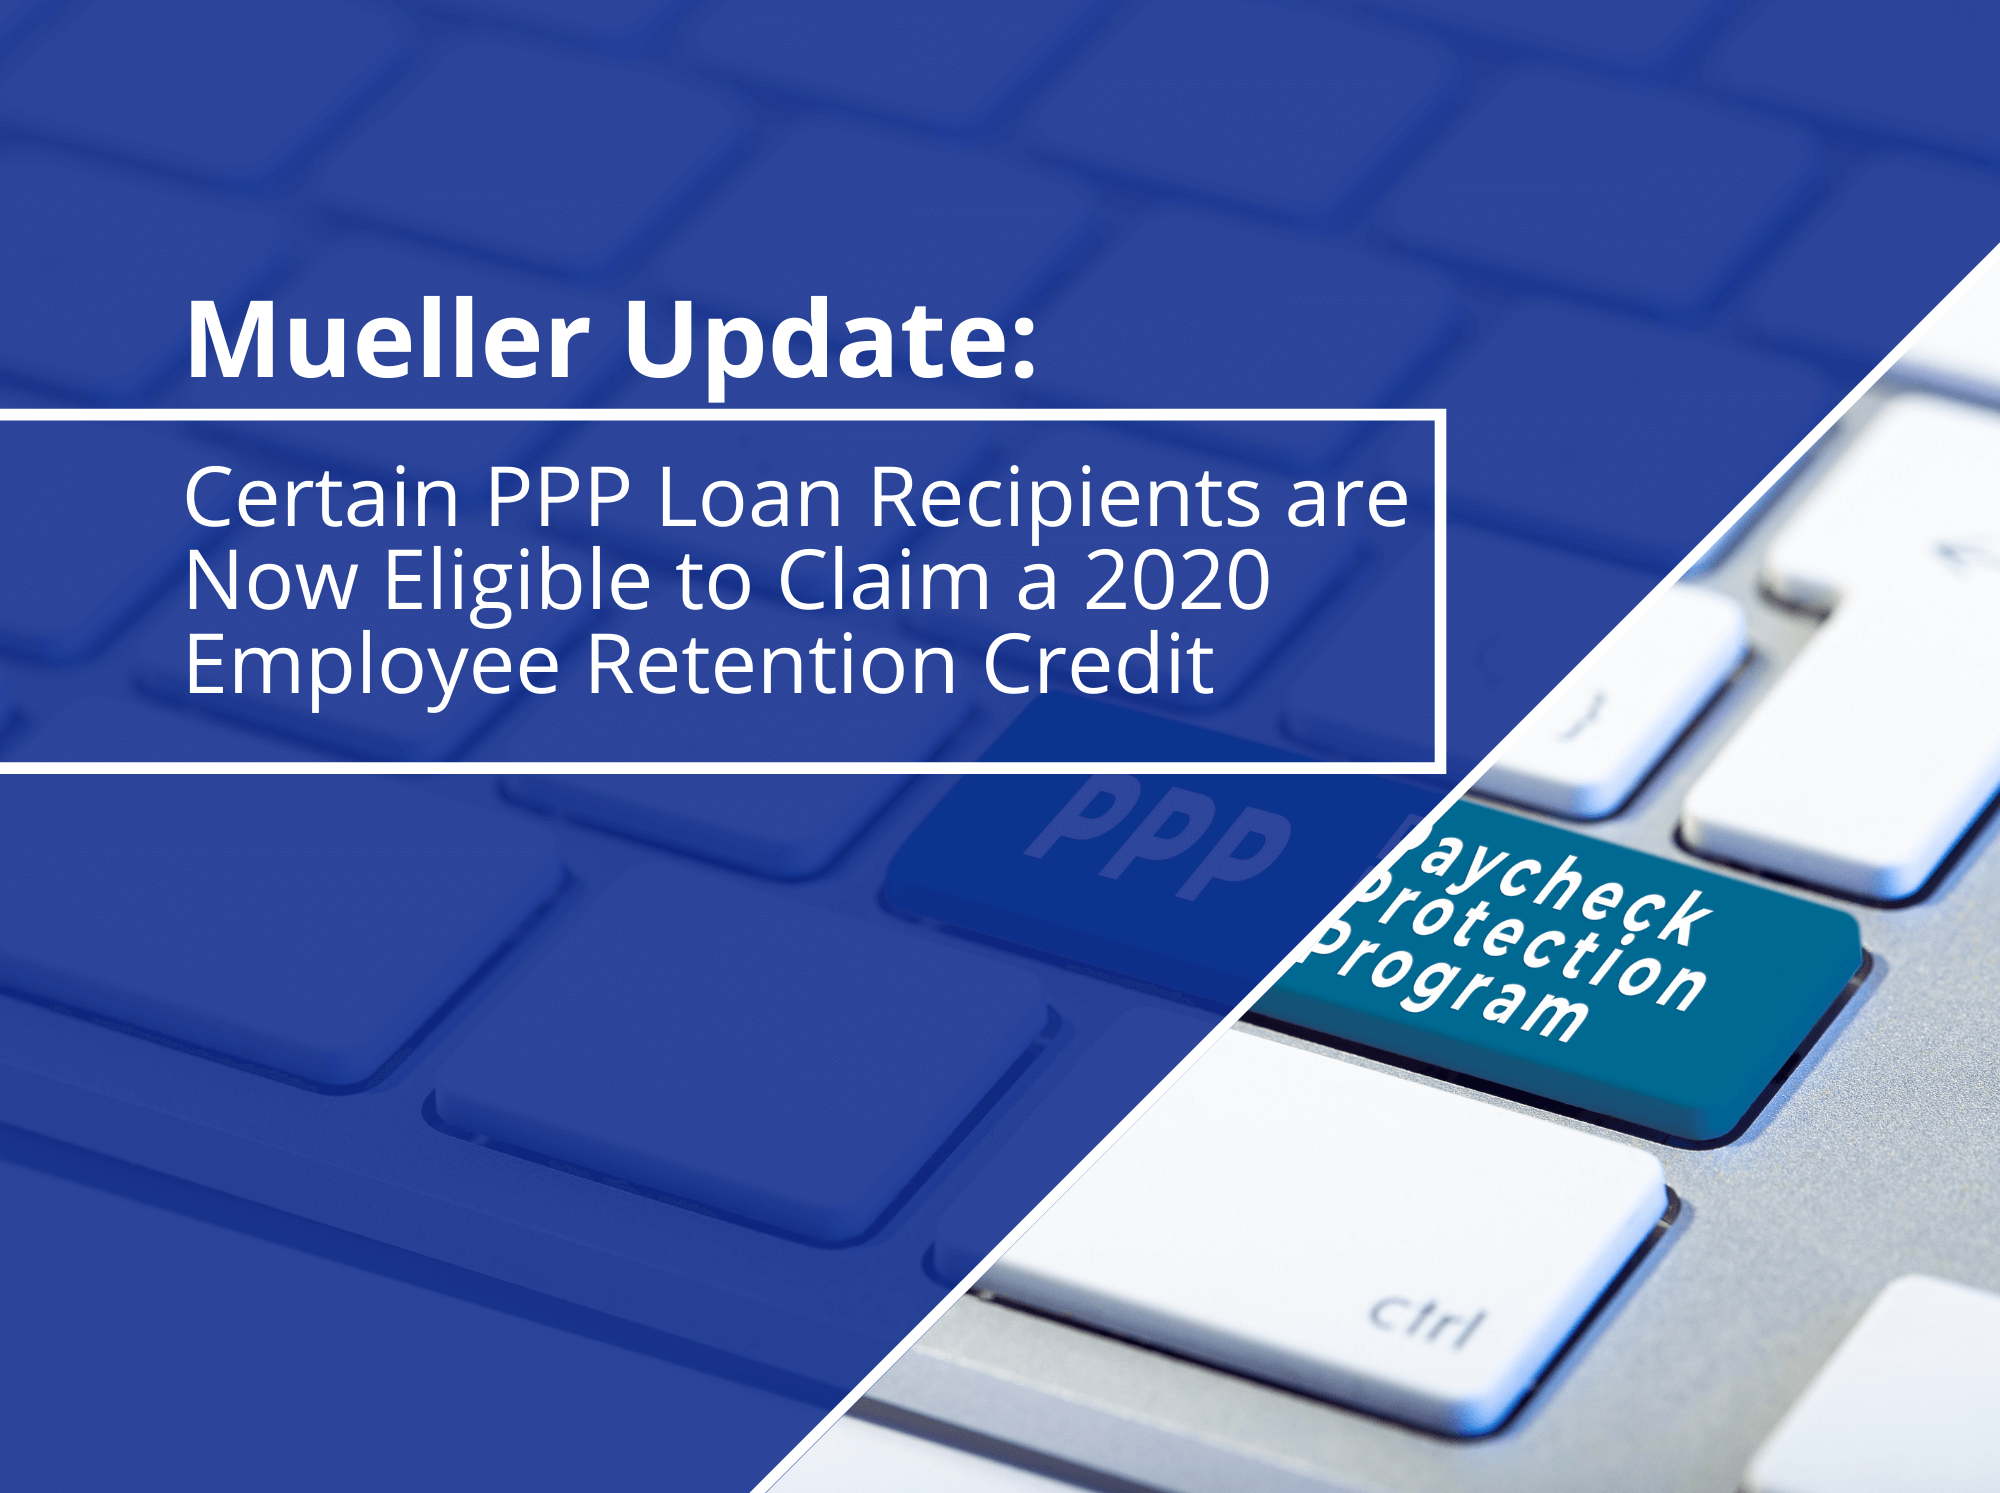 Certain Paycheck Protection Program (PPP) Loan Recipients Are Now Eligible To Claim A 2020 Employee Retention Credit (ERC)